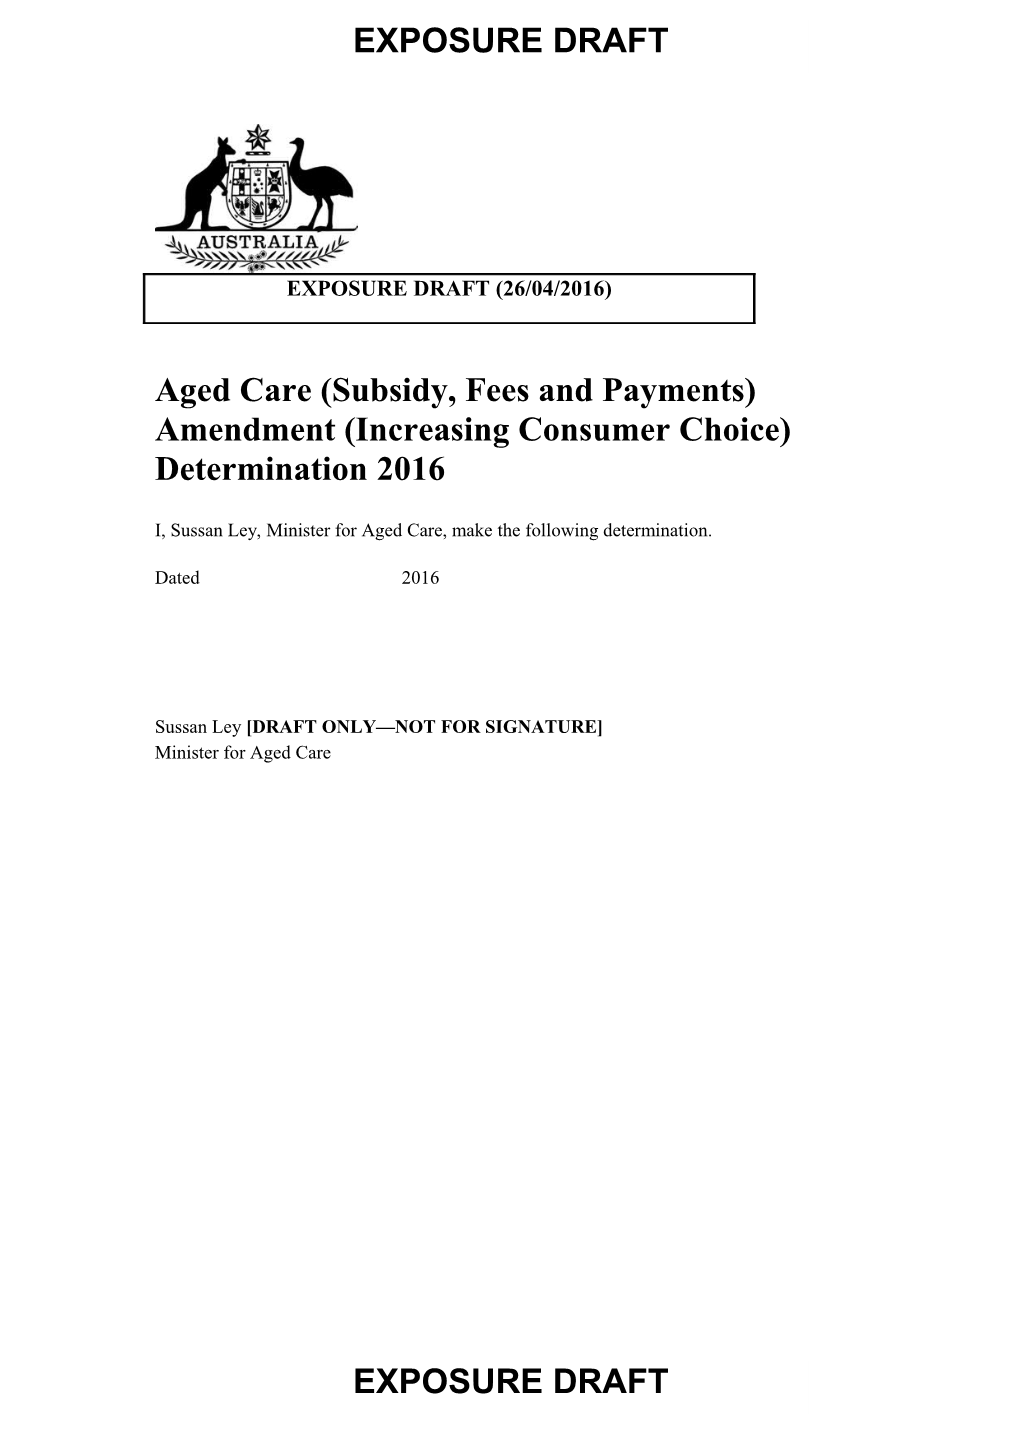 Aged Care (Subsidy, Fees and Payments) Amendment (Increasing Consumer Choice) Determination2016